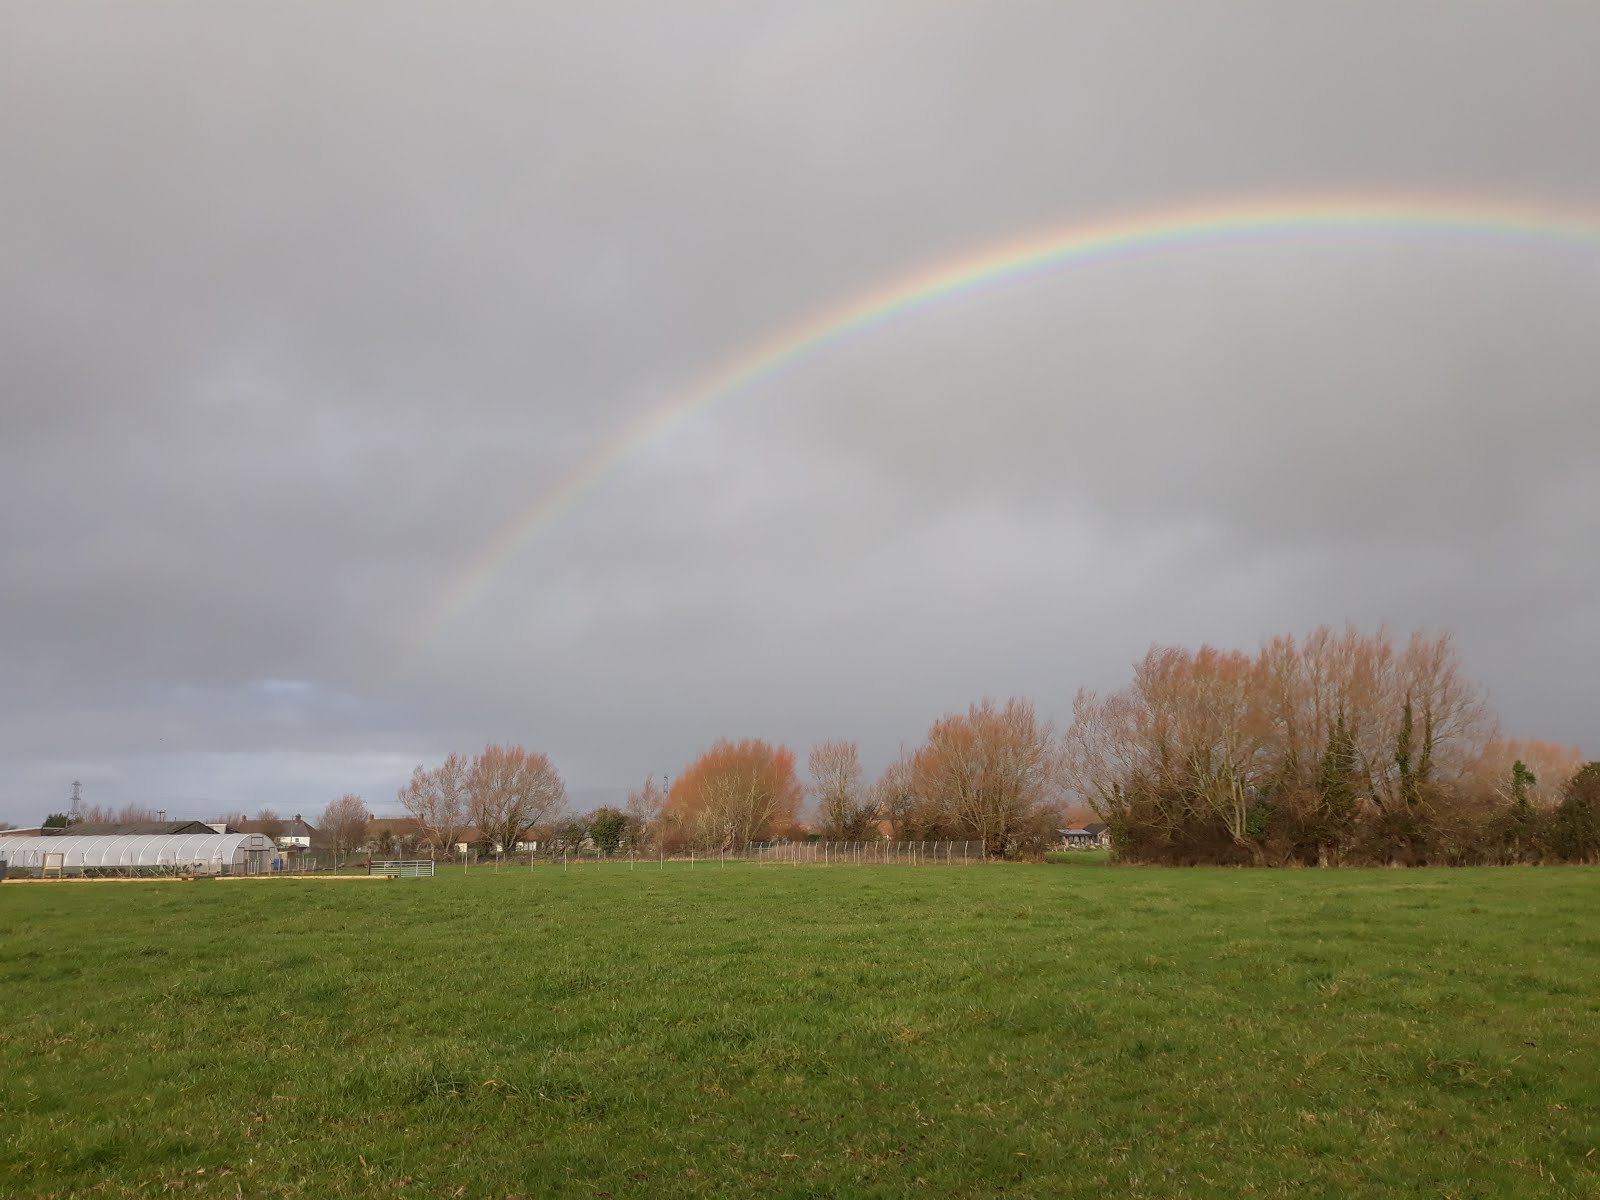 Treated to another lovely rainbow